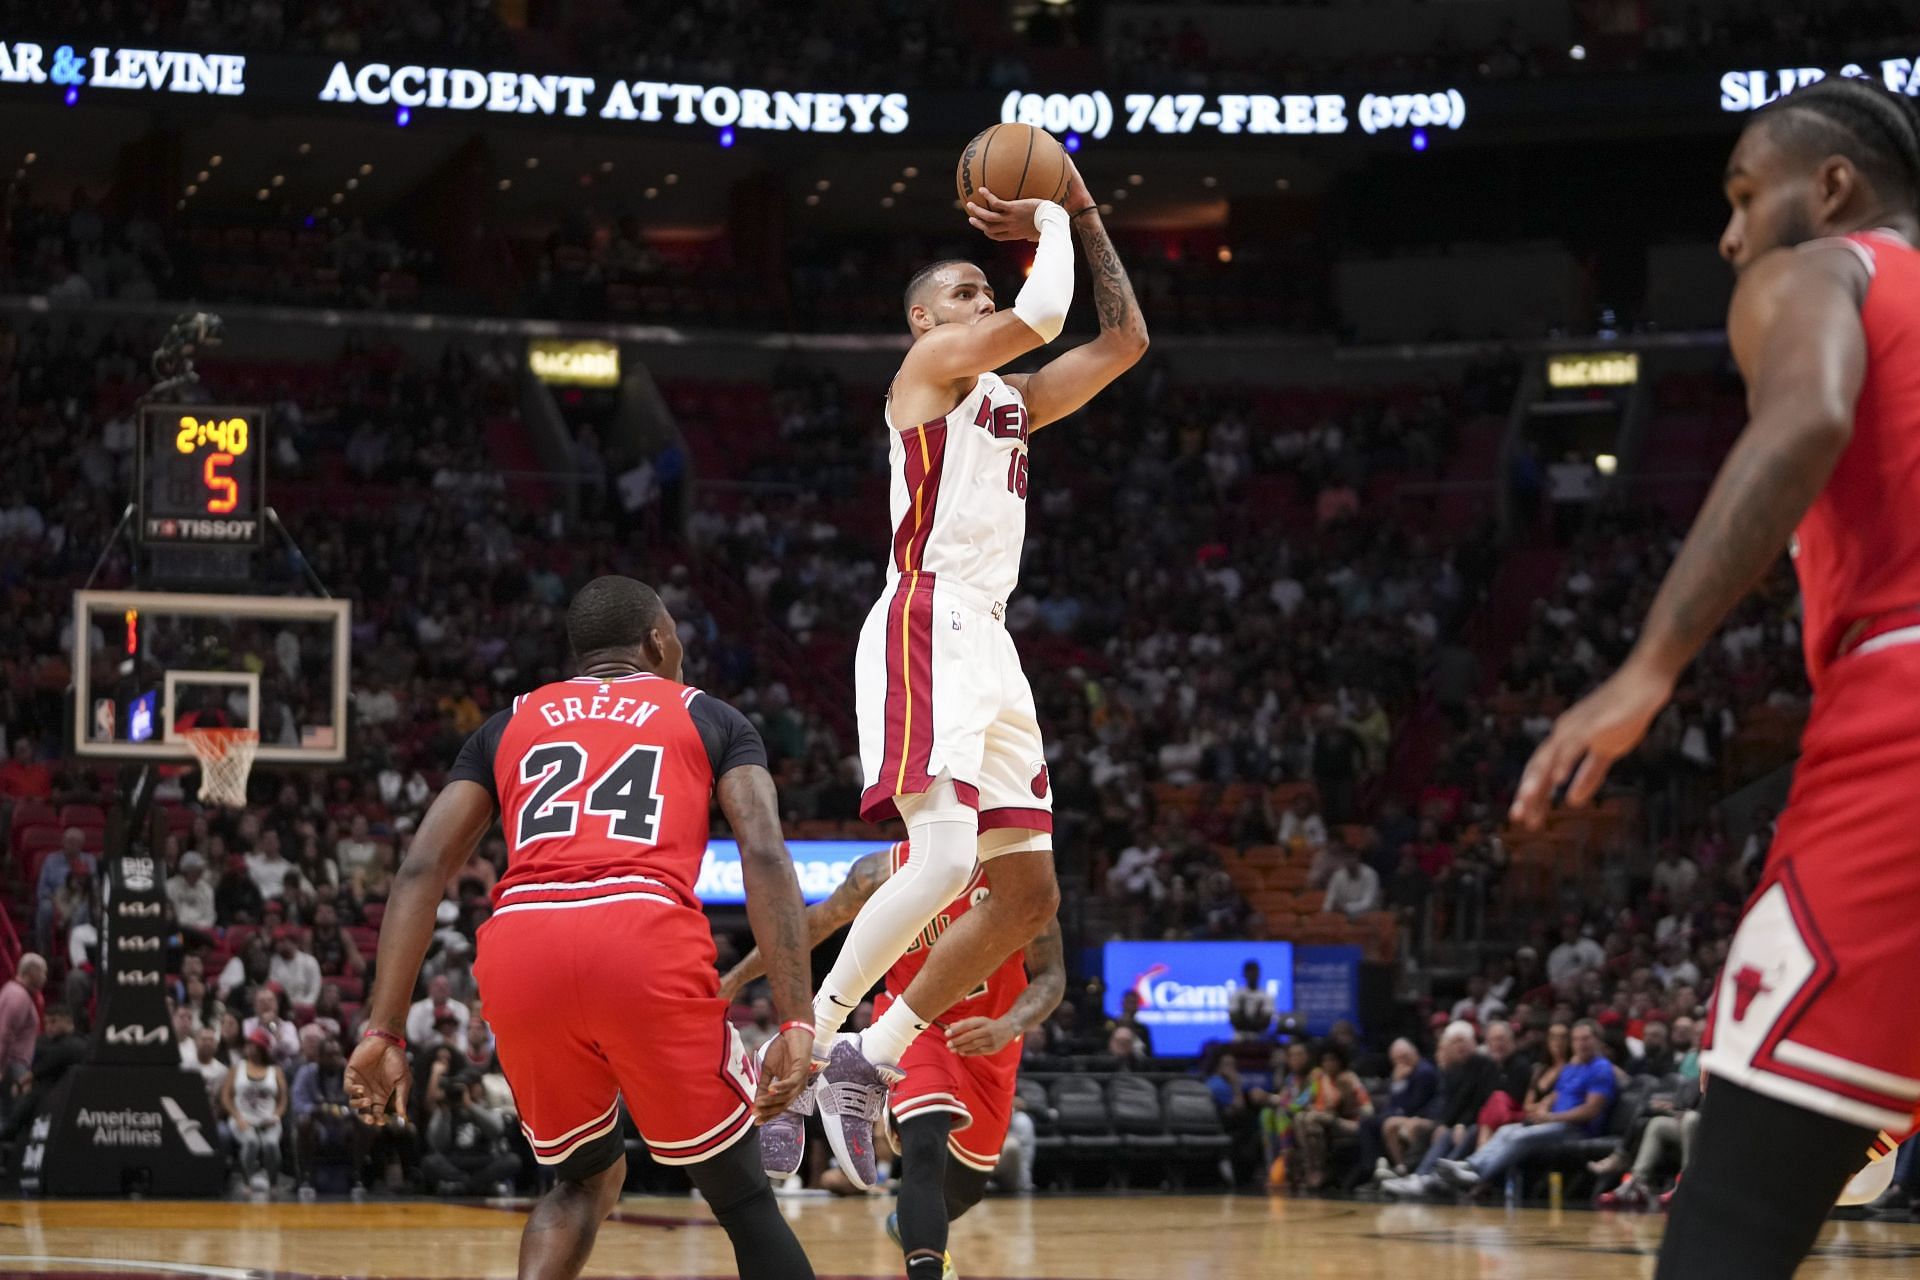 The Heat are 0-3 against the Bulls this season (Image via Getty Images)